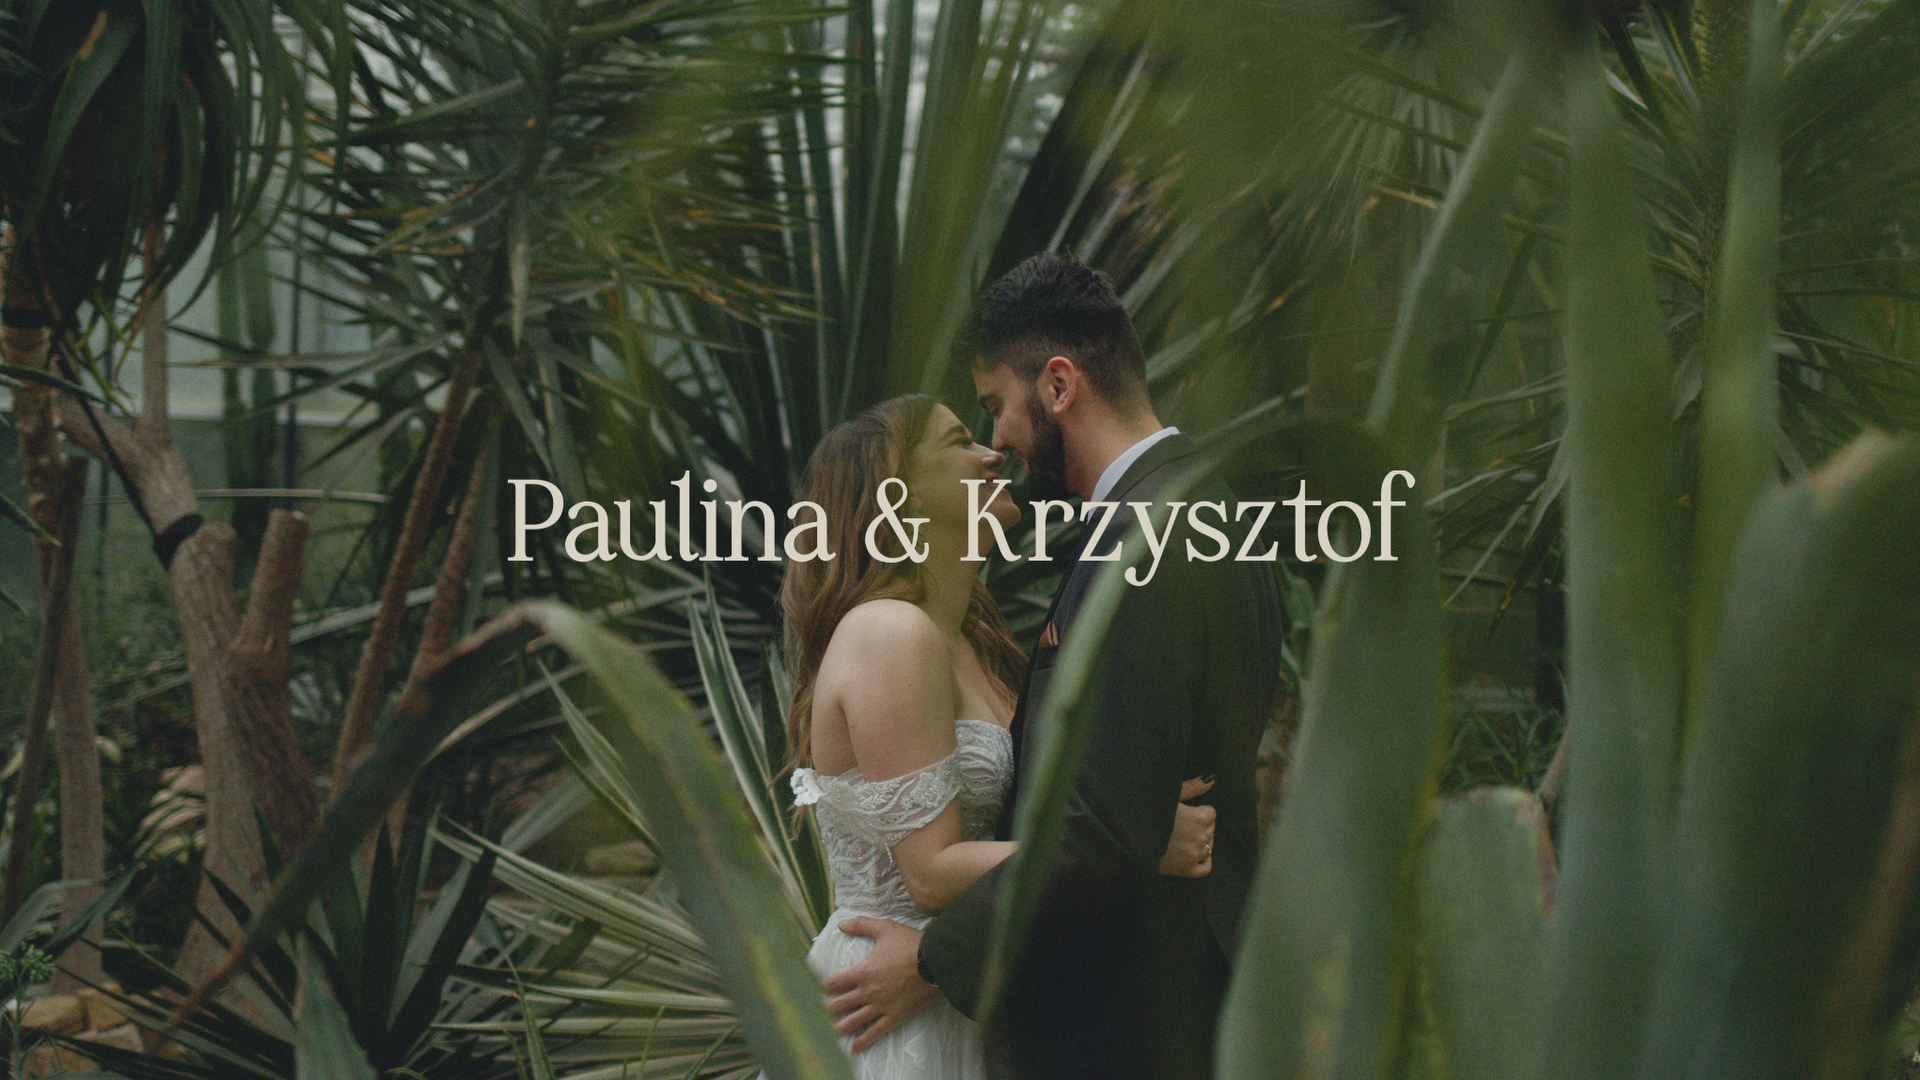 Image of Paulina and Krzysztof